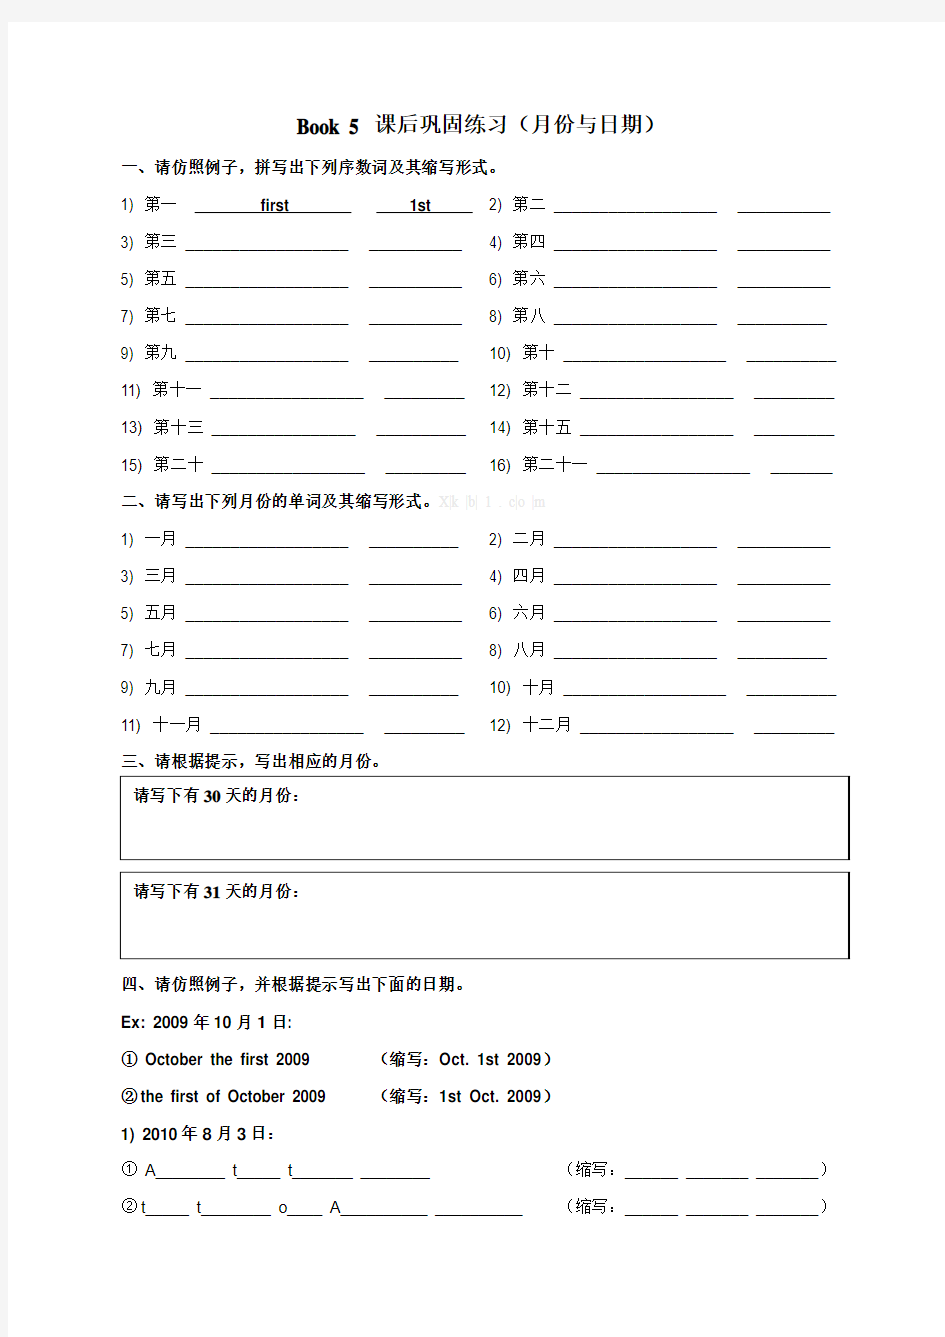 Book5 Unit2 Work with Language练习题